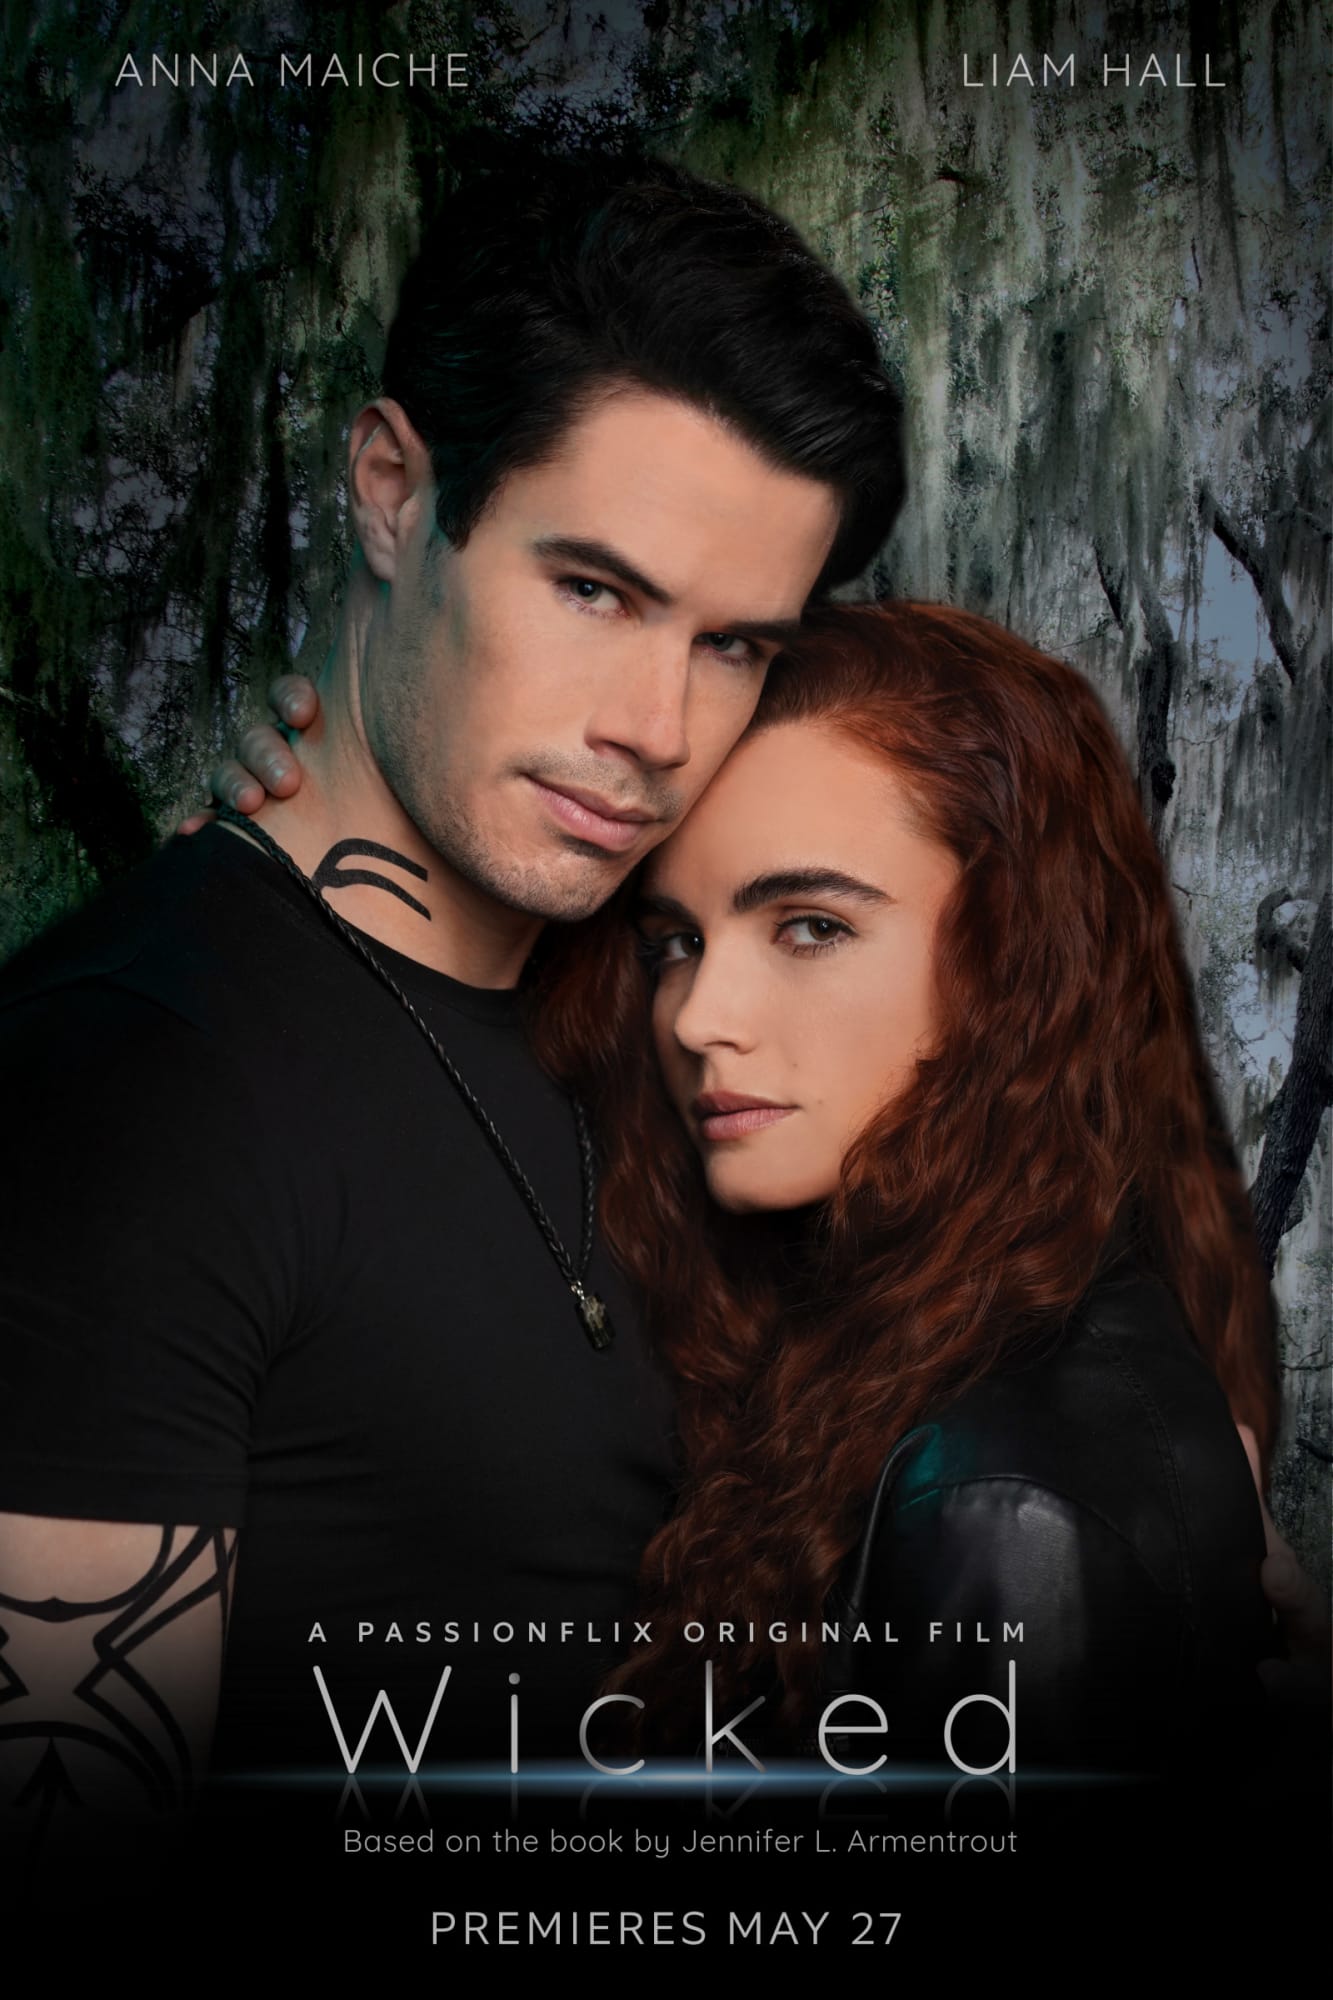 Passionflix Wicked trailer delivers faehunting goodness